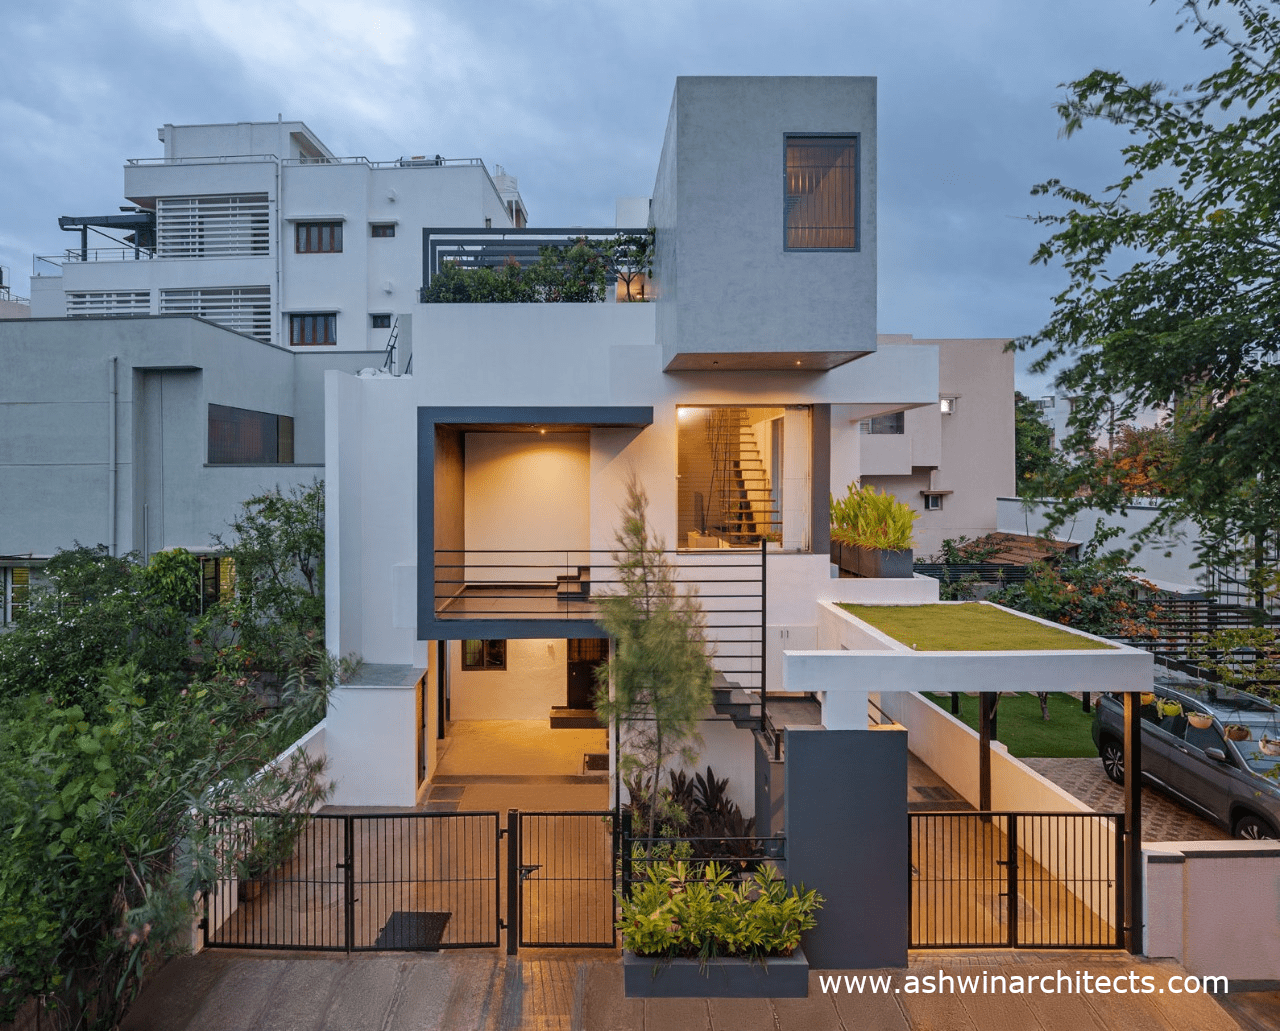 pawans-30-50-house-design-residential-architects-in-bangalore-evening-terrace-ashwin-architects-in-bangalore